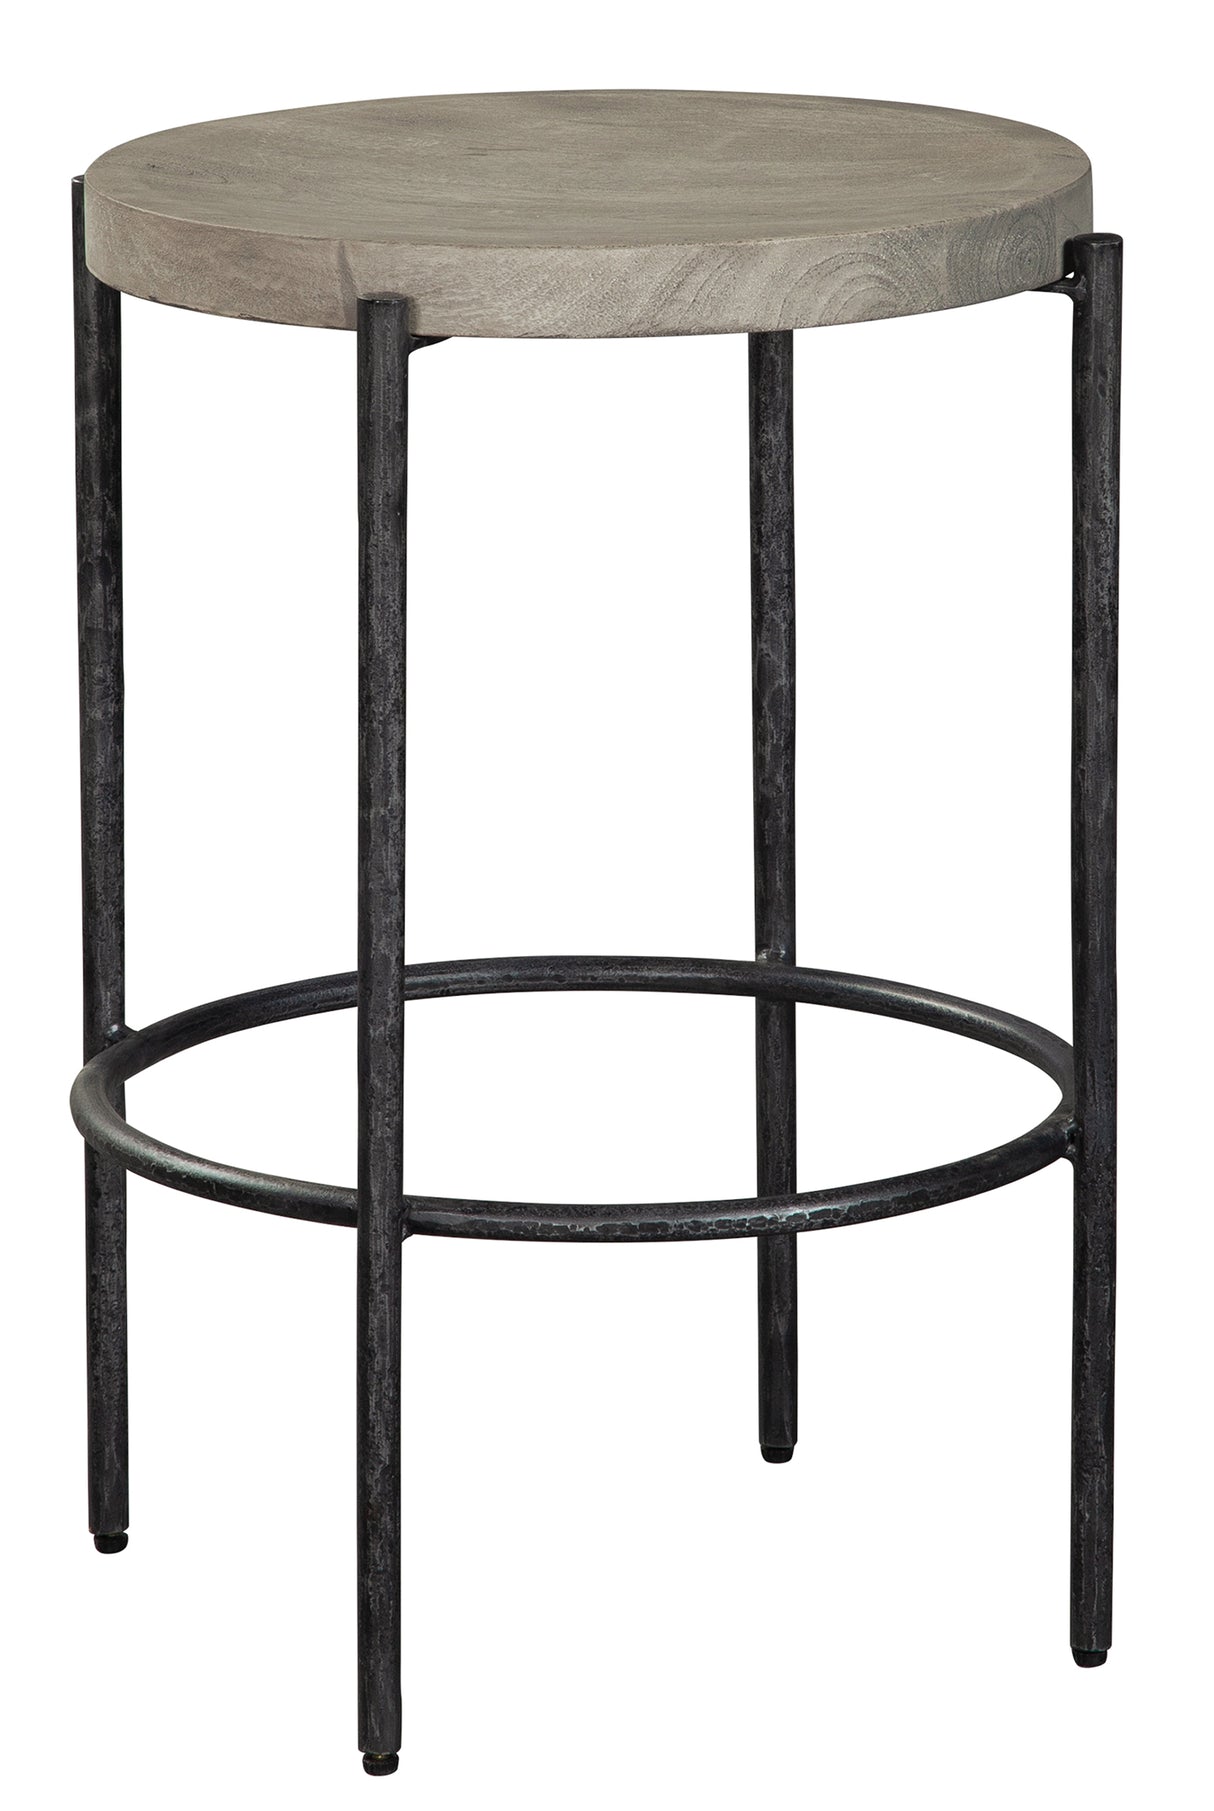 Hekman 24929 Bedford Park 17.75in. x 17.75in. x 24.25in. Counter Stool